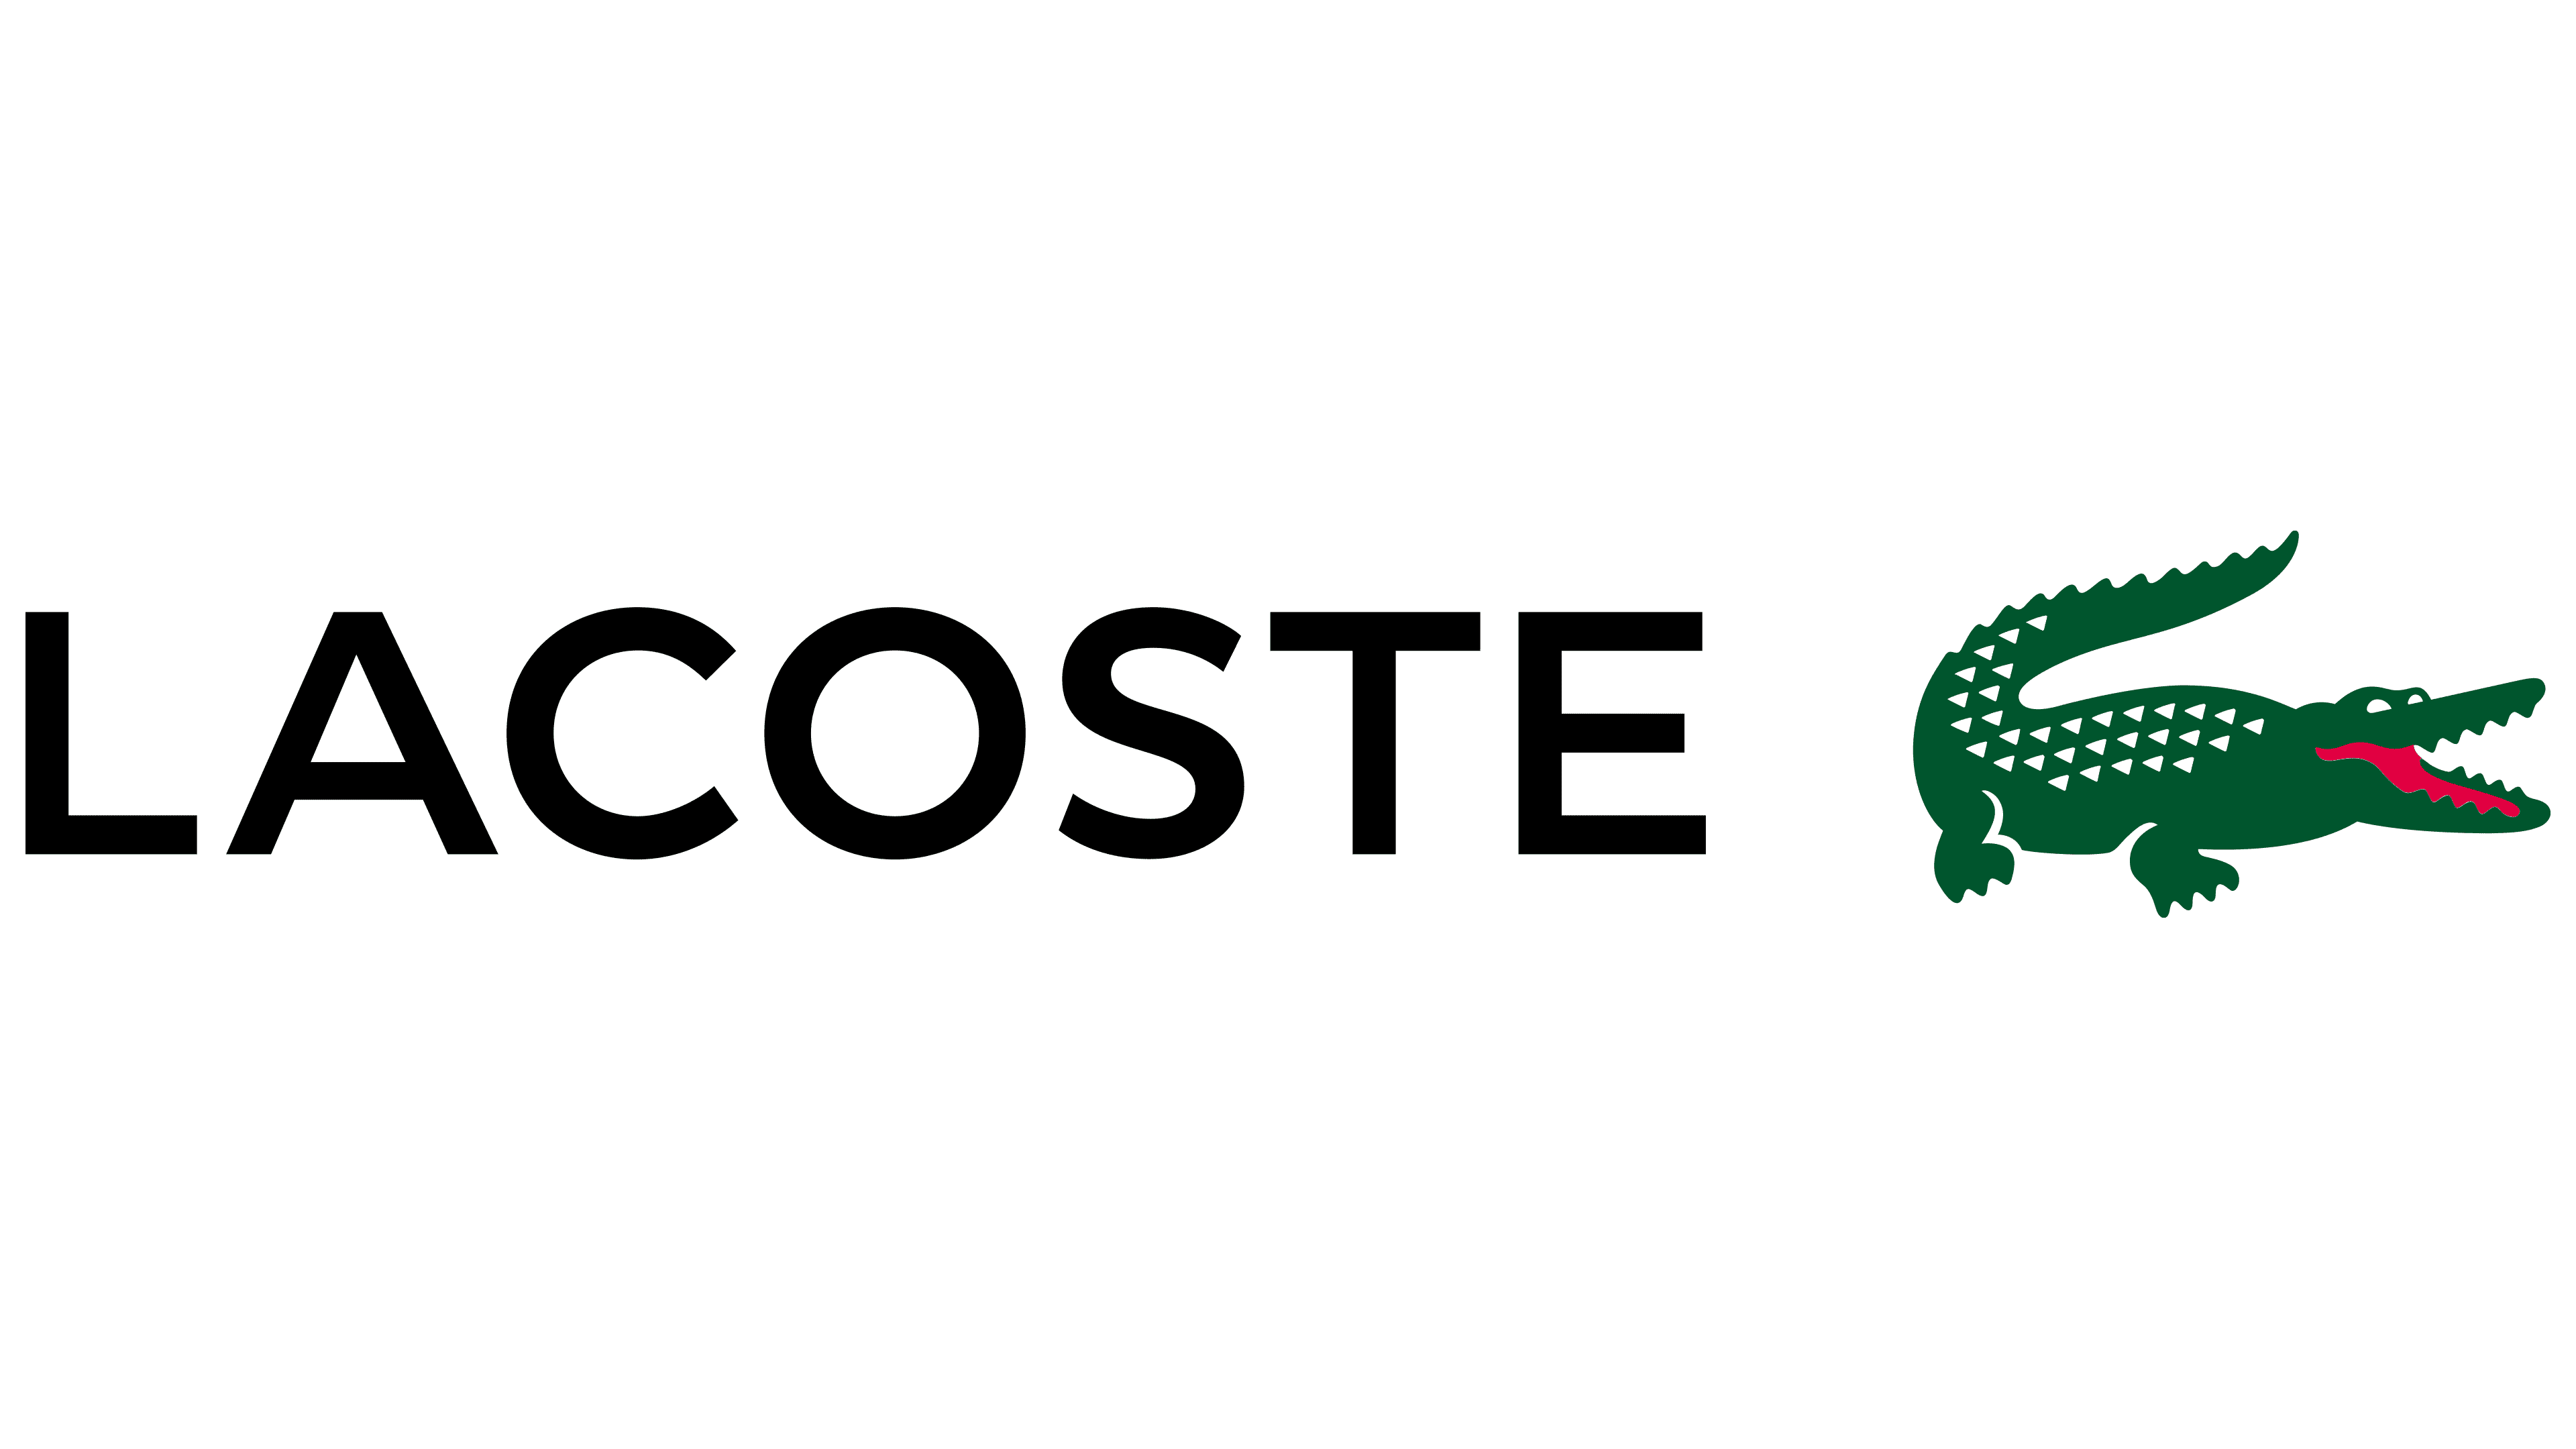 lacoste first name